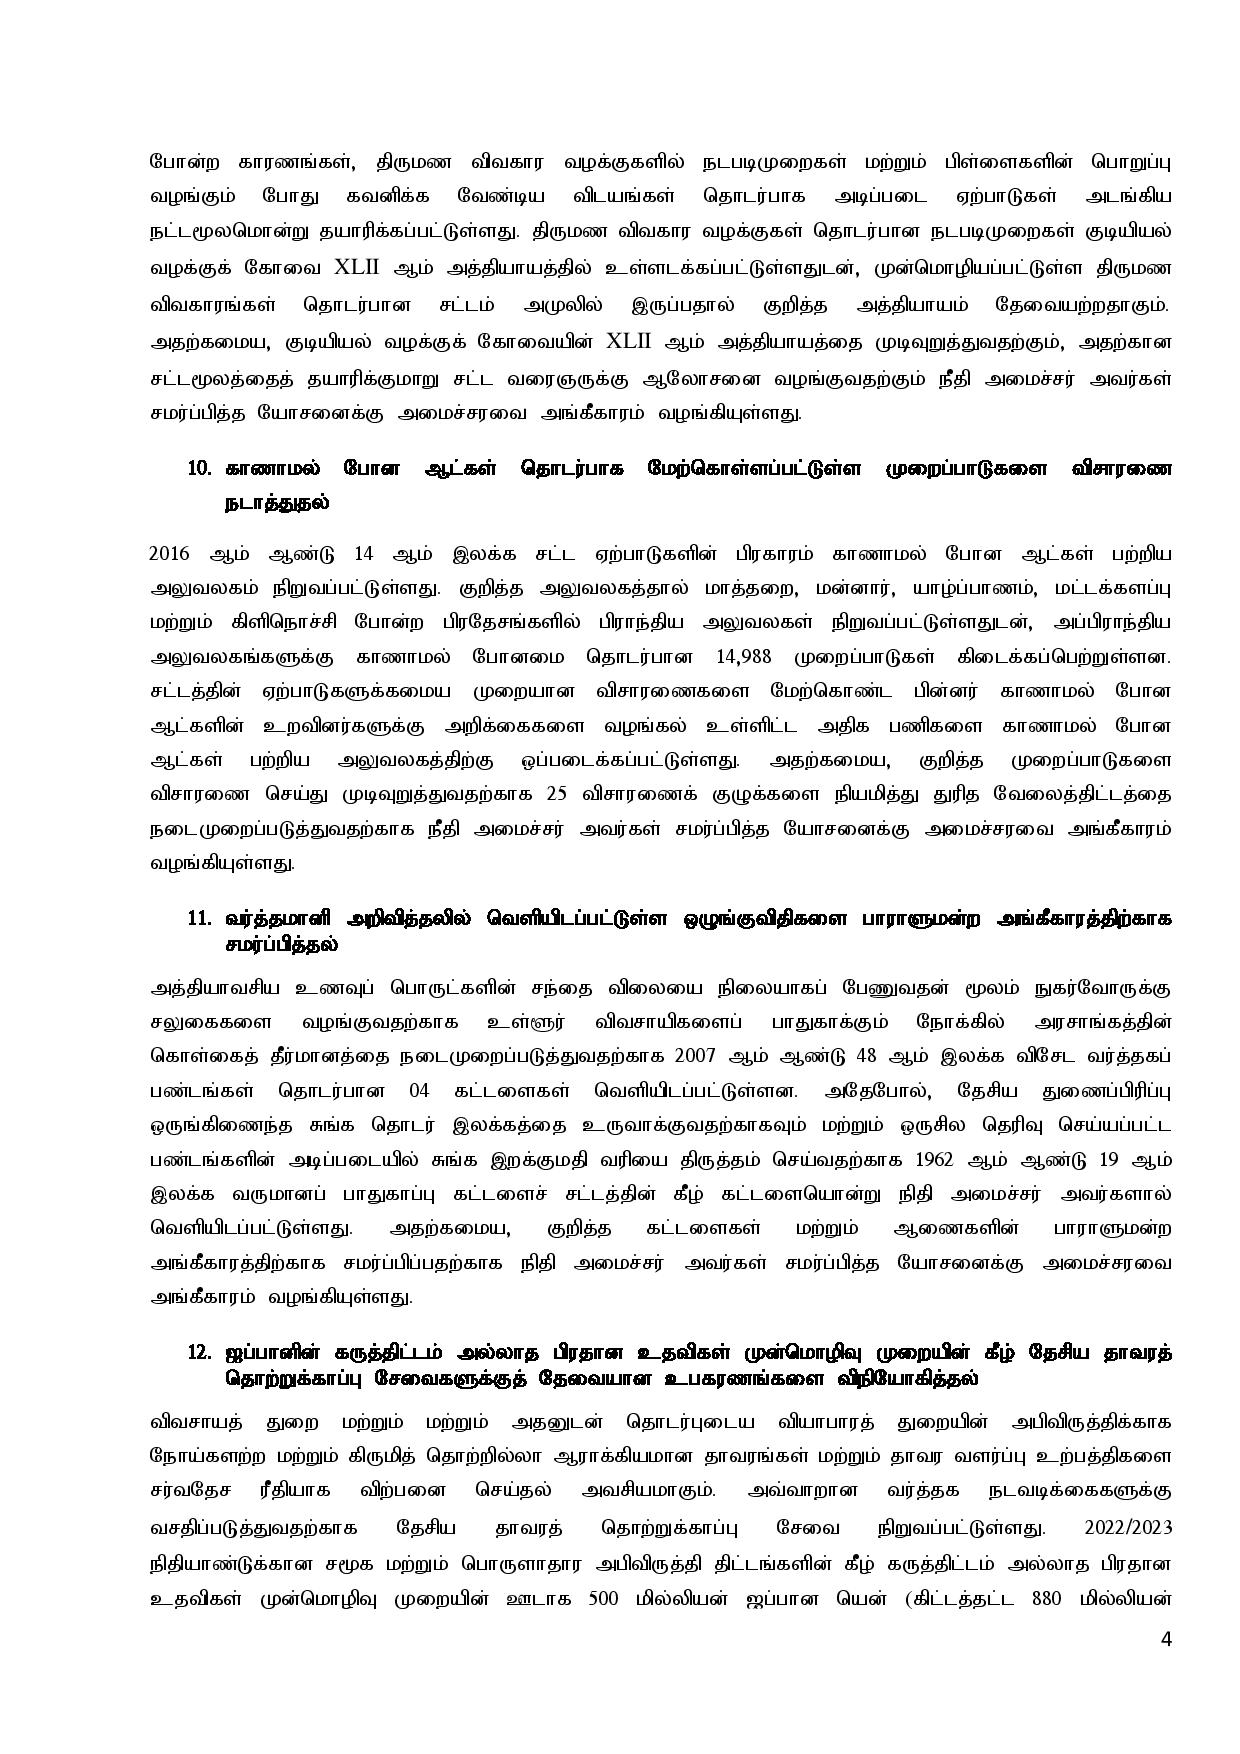 Cabinet Decisions on 07.03.2022 T page 004